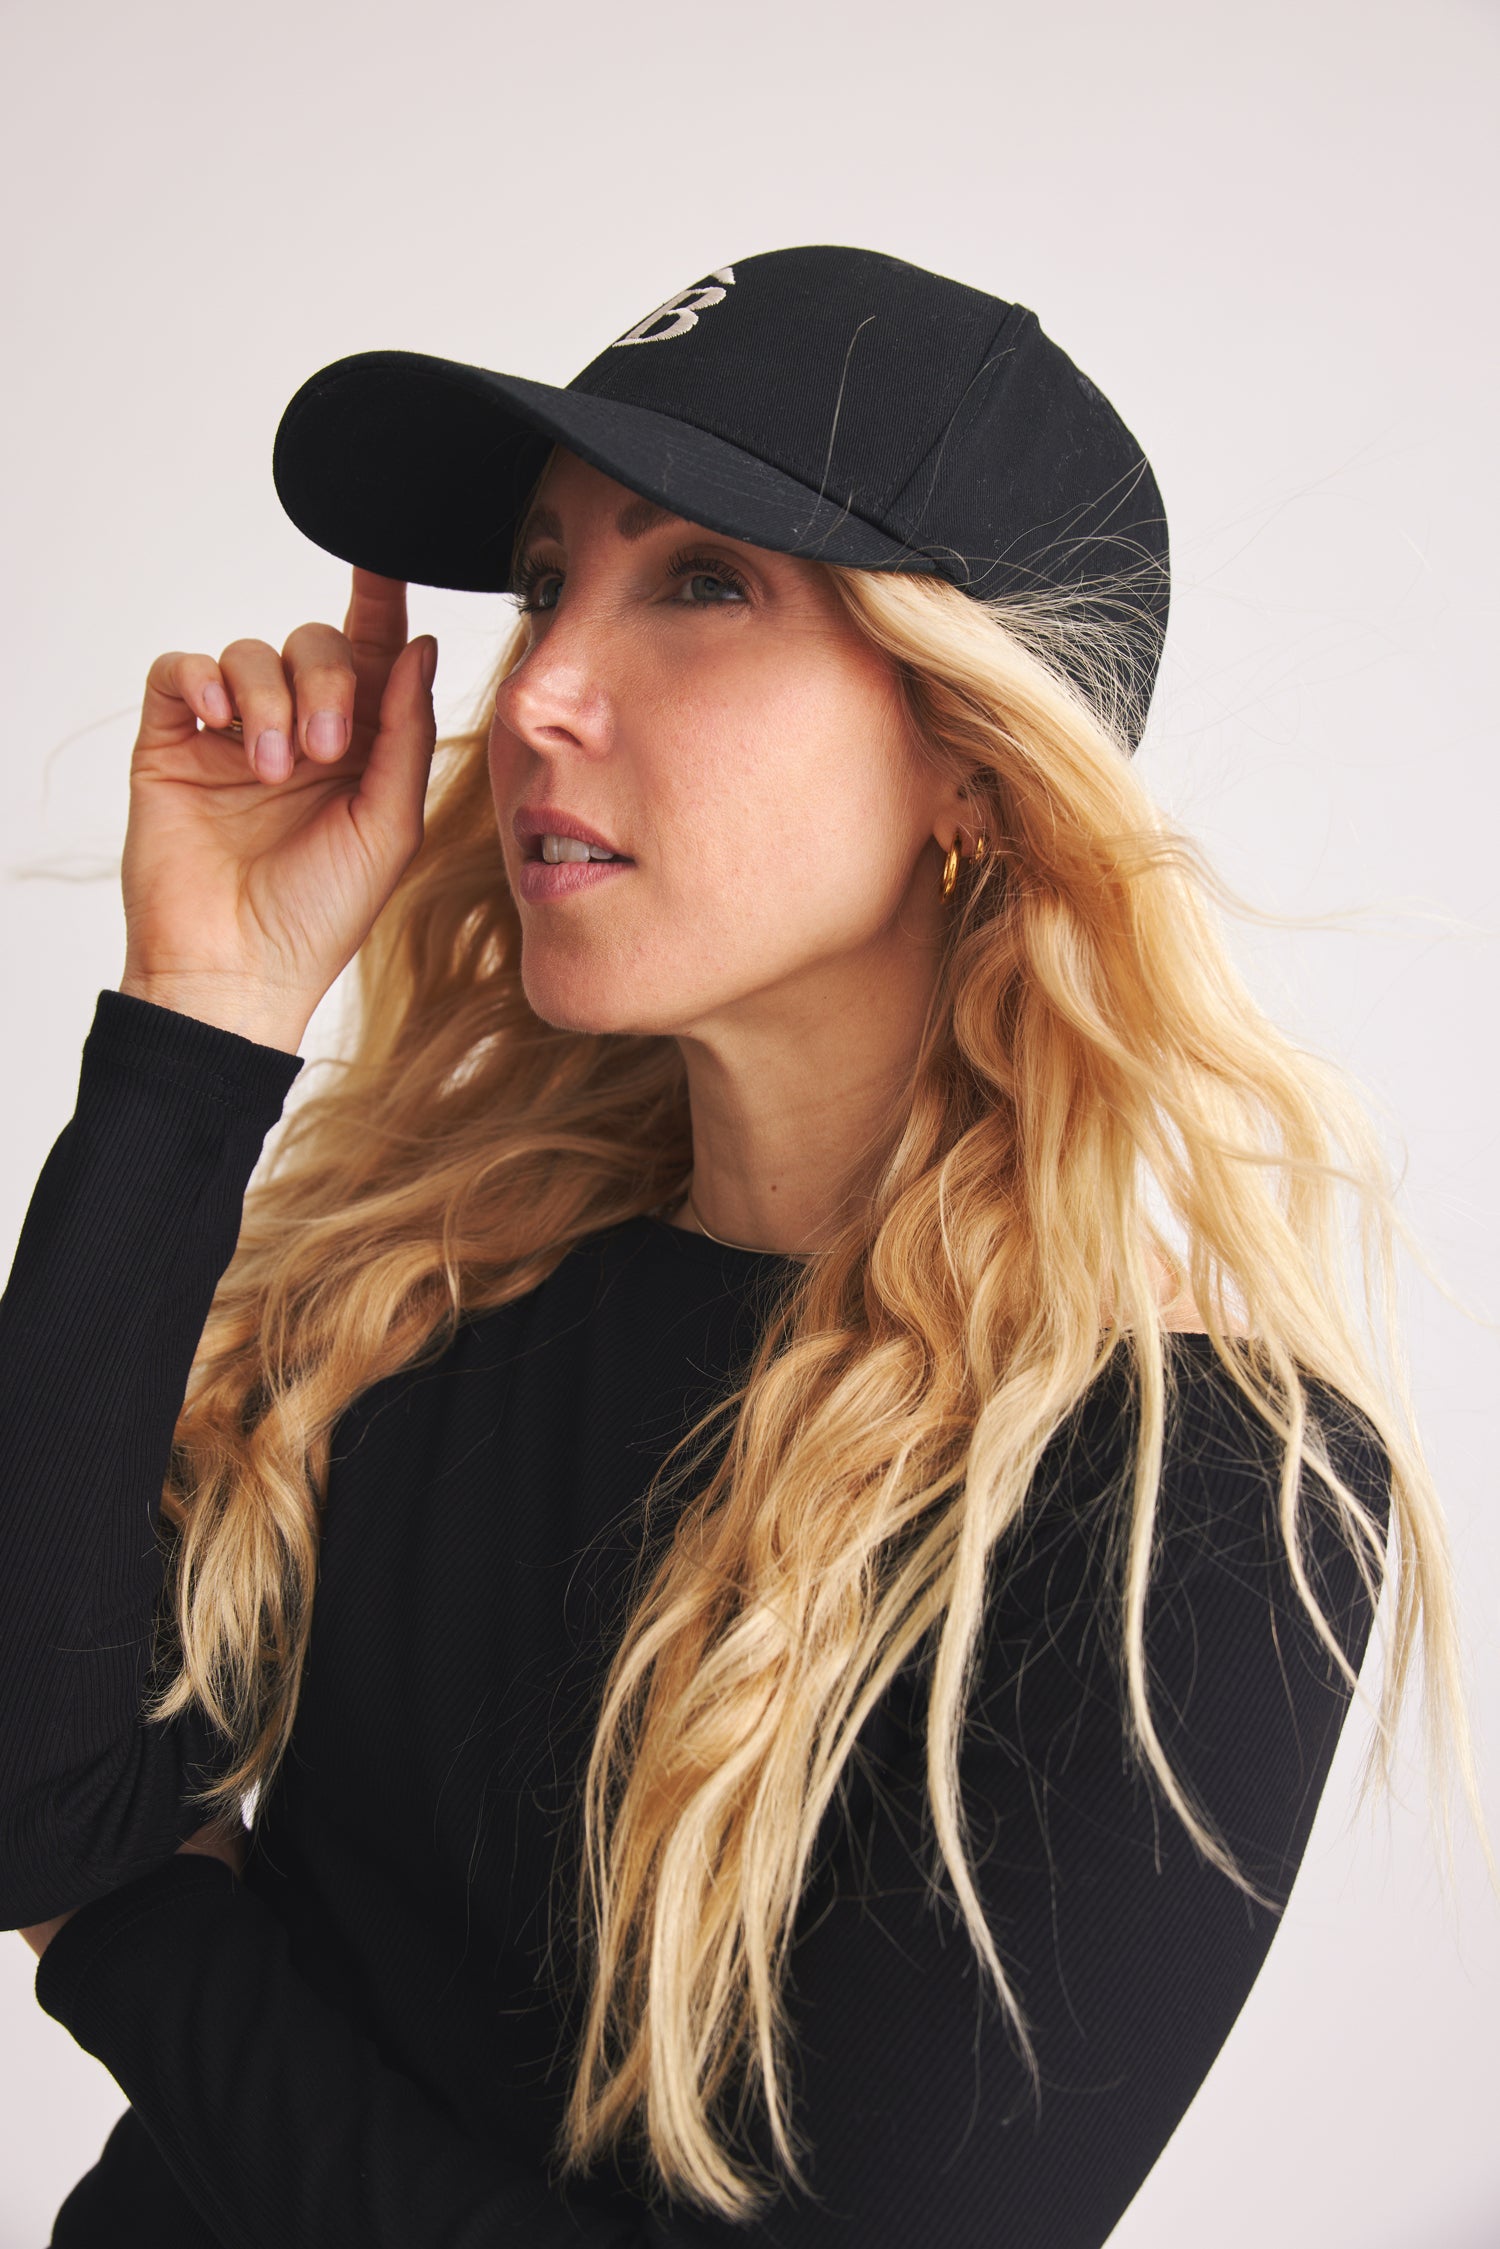 Black Cap B-Stick made from 100% organic cotton by Baige the Label